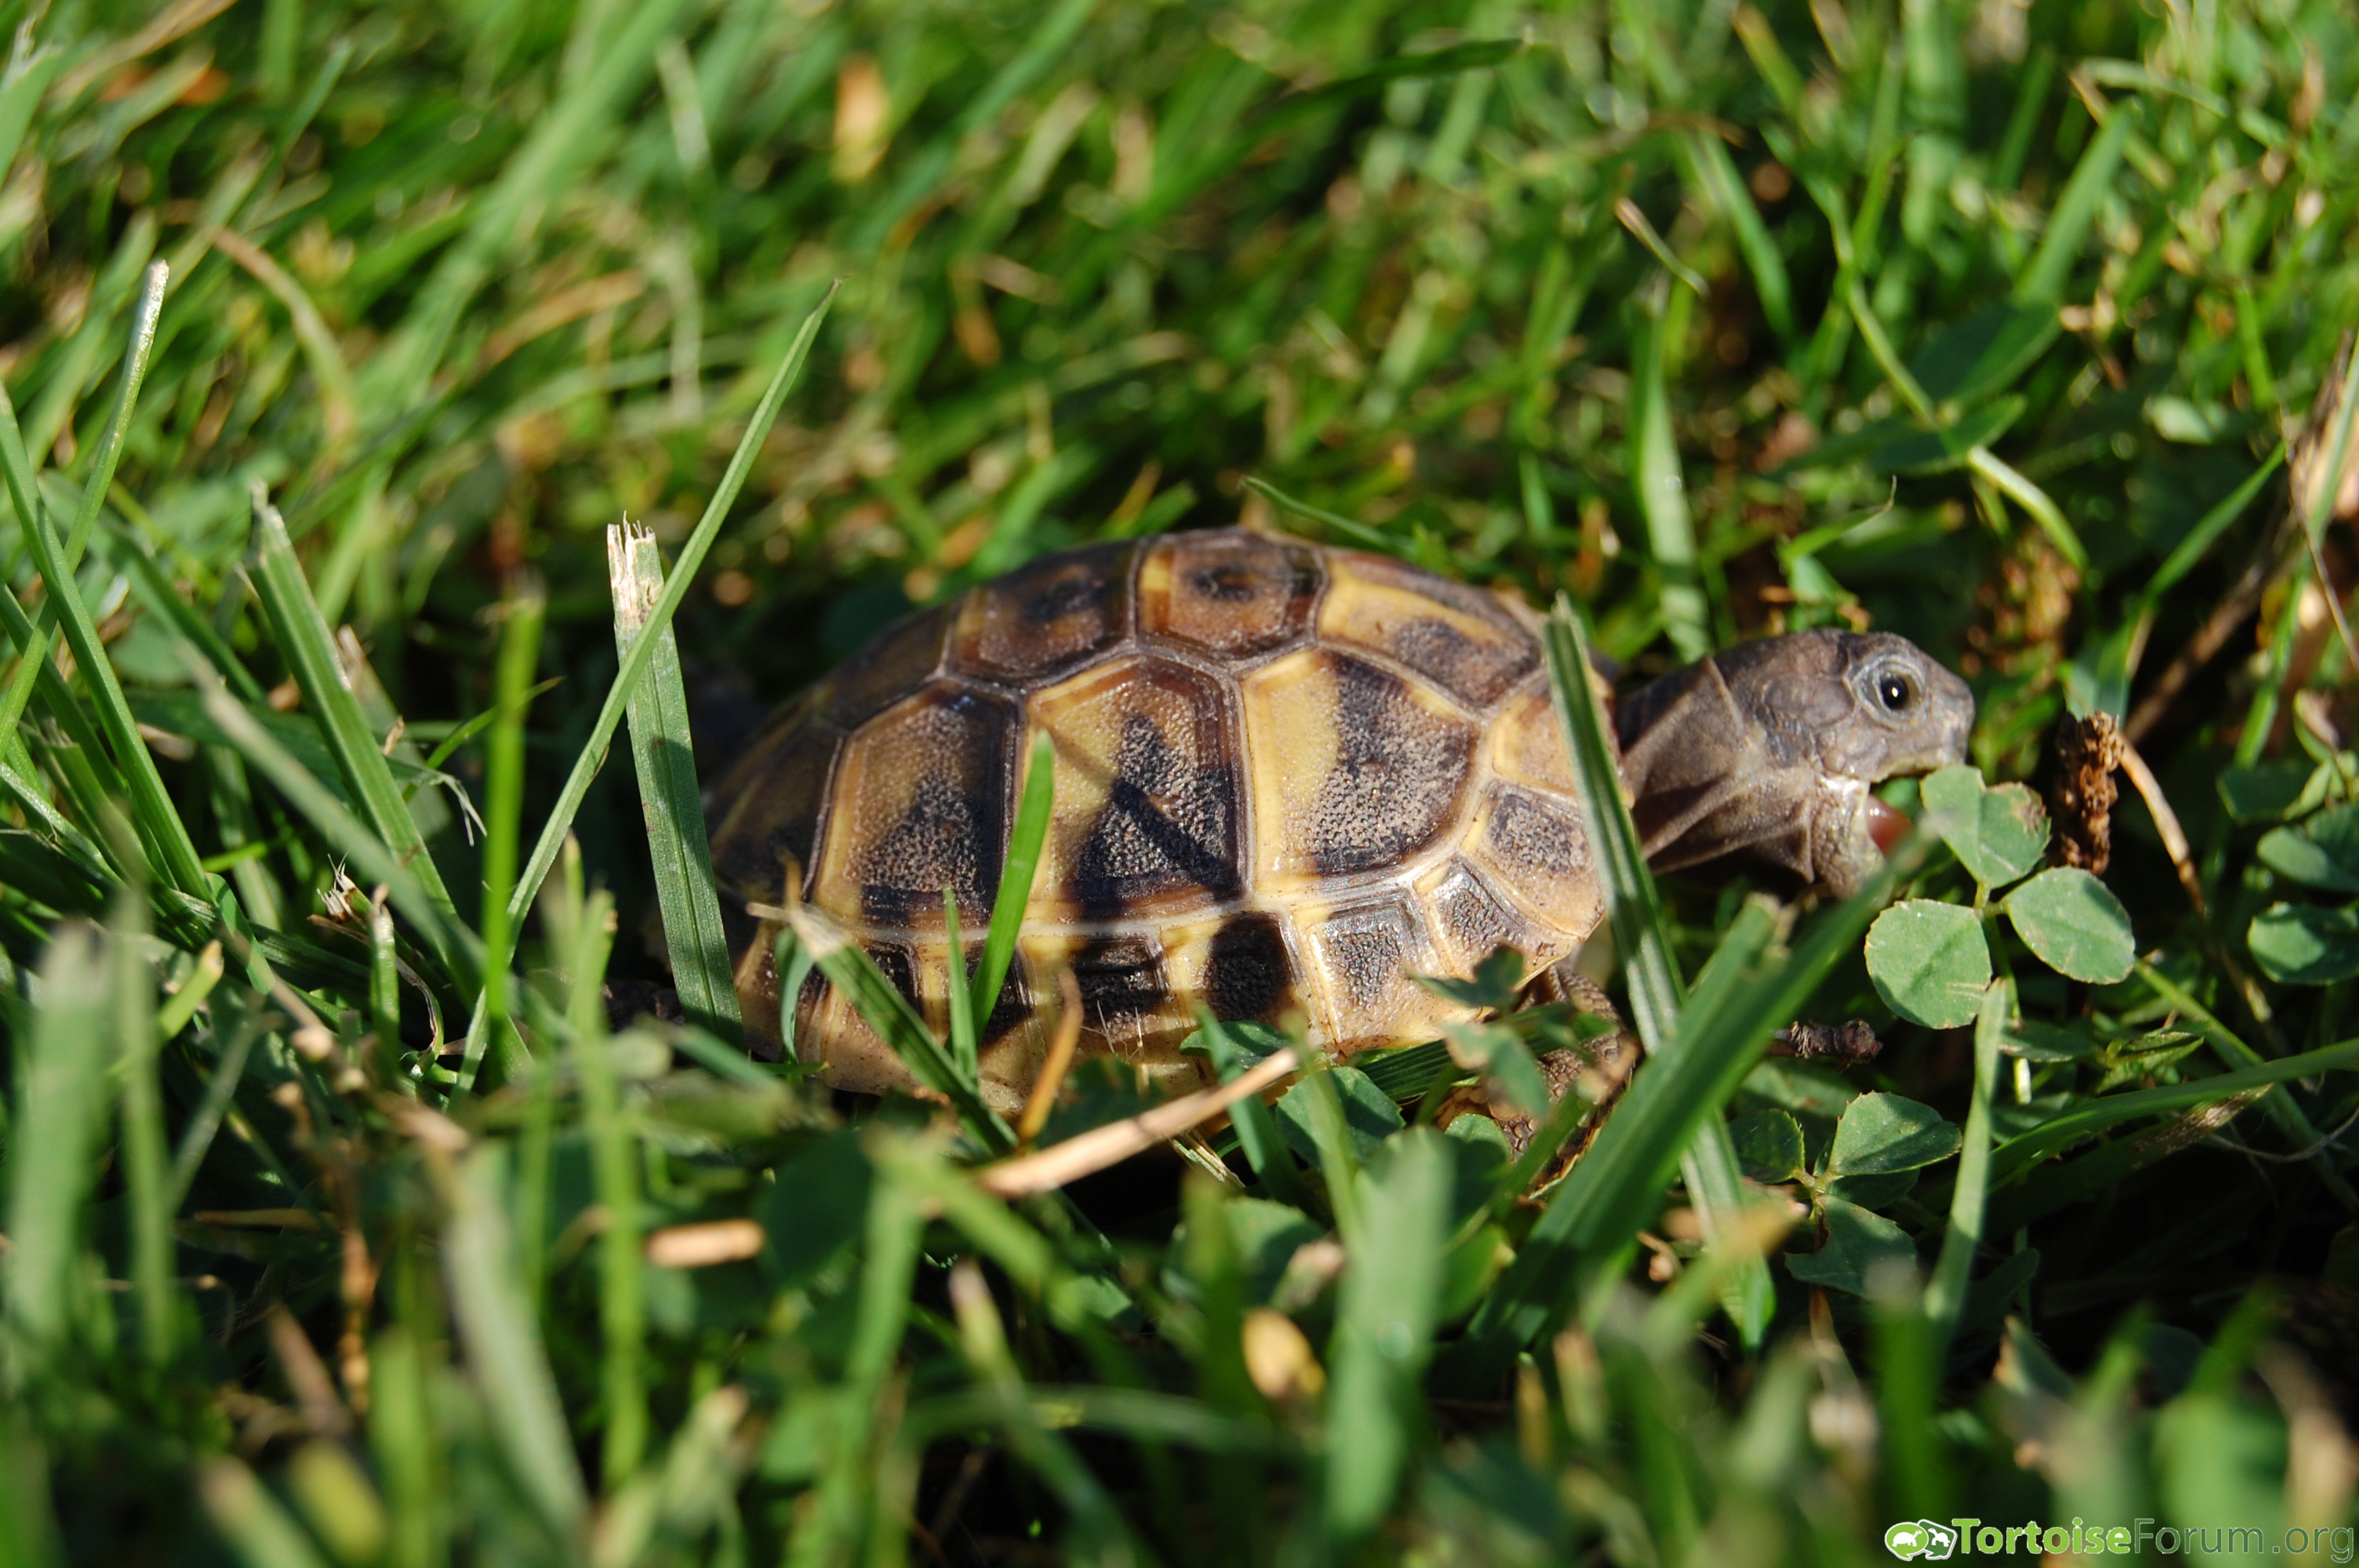 Hatchling eating clover and grass